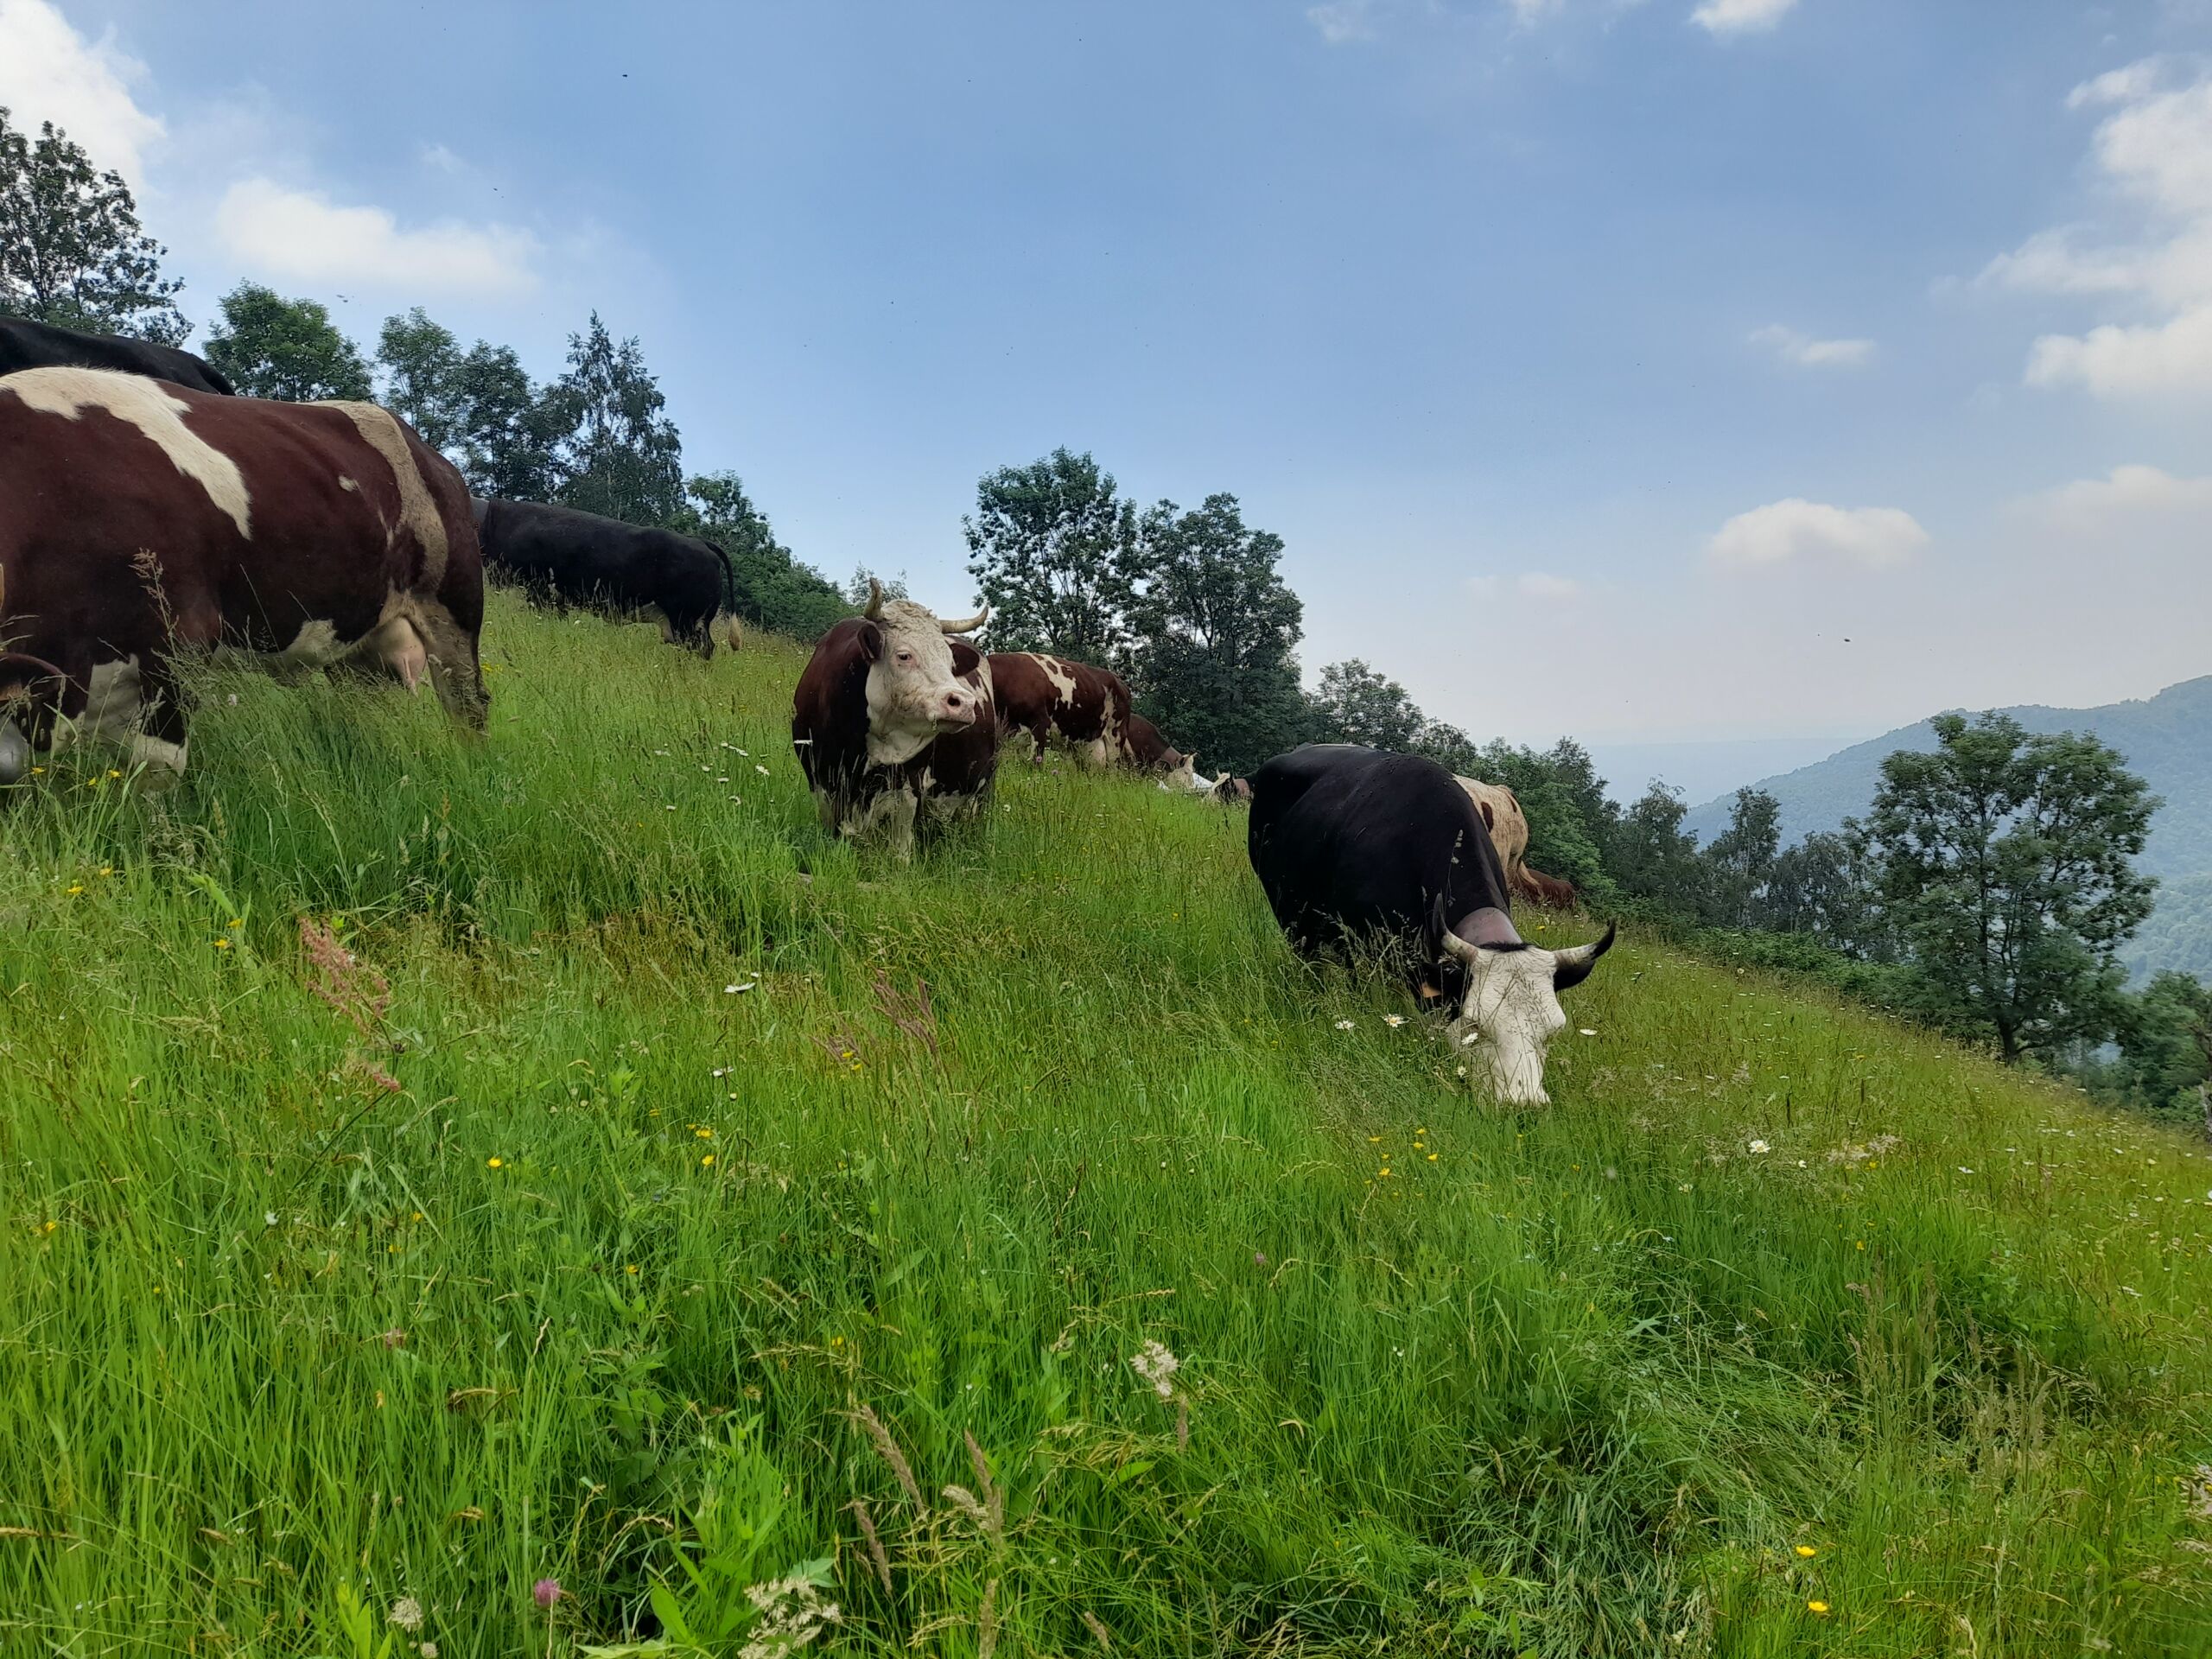 Spending a day in an alpine pasture